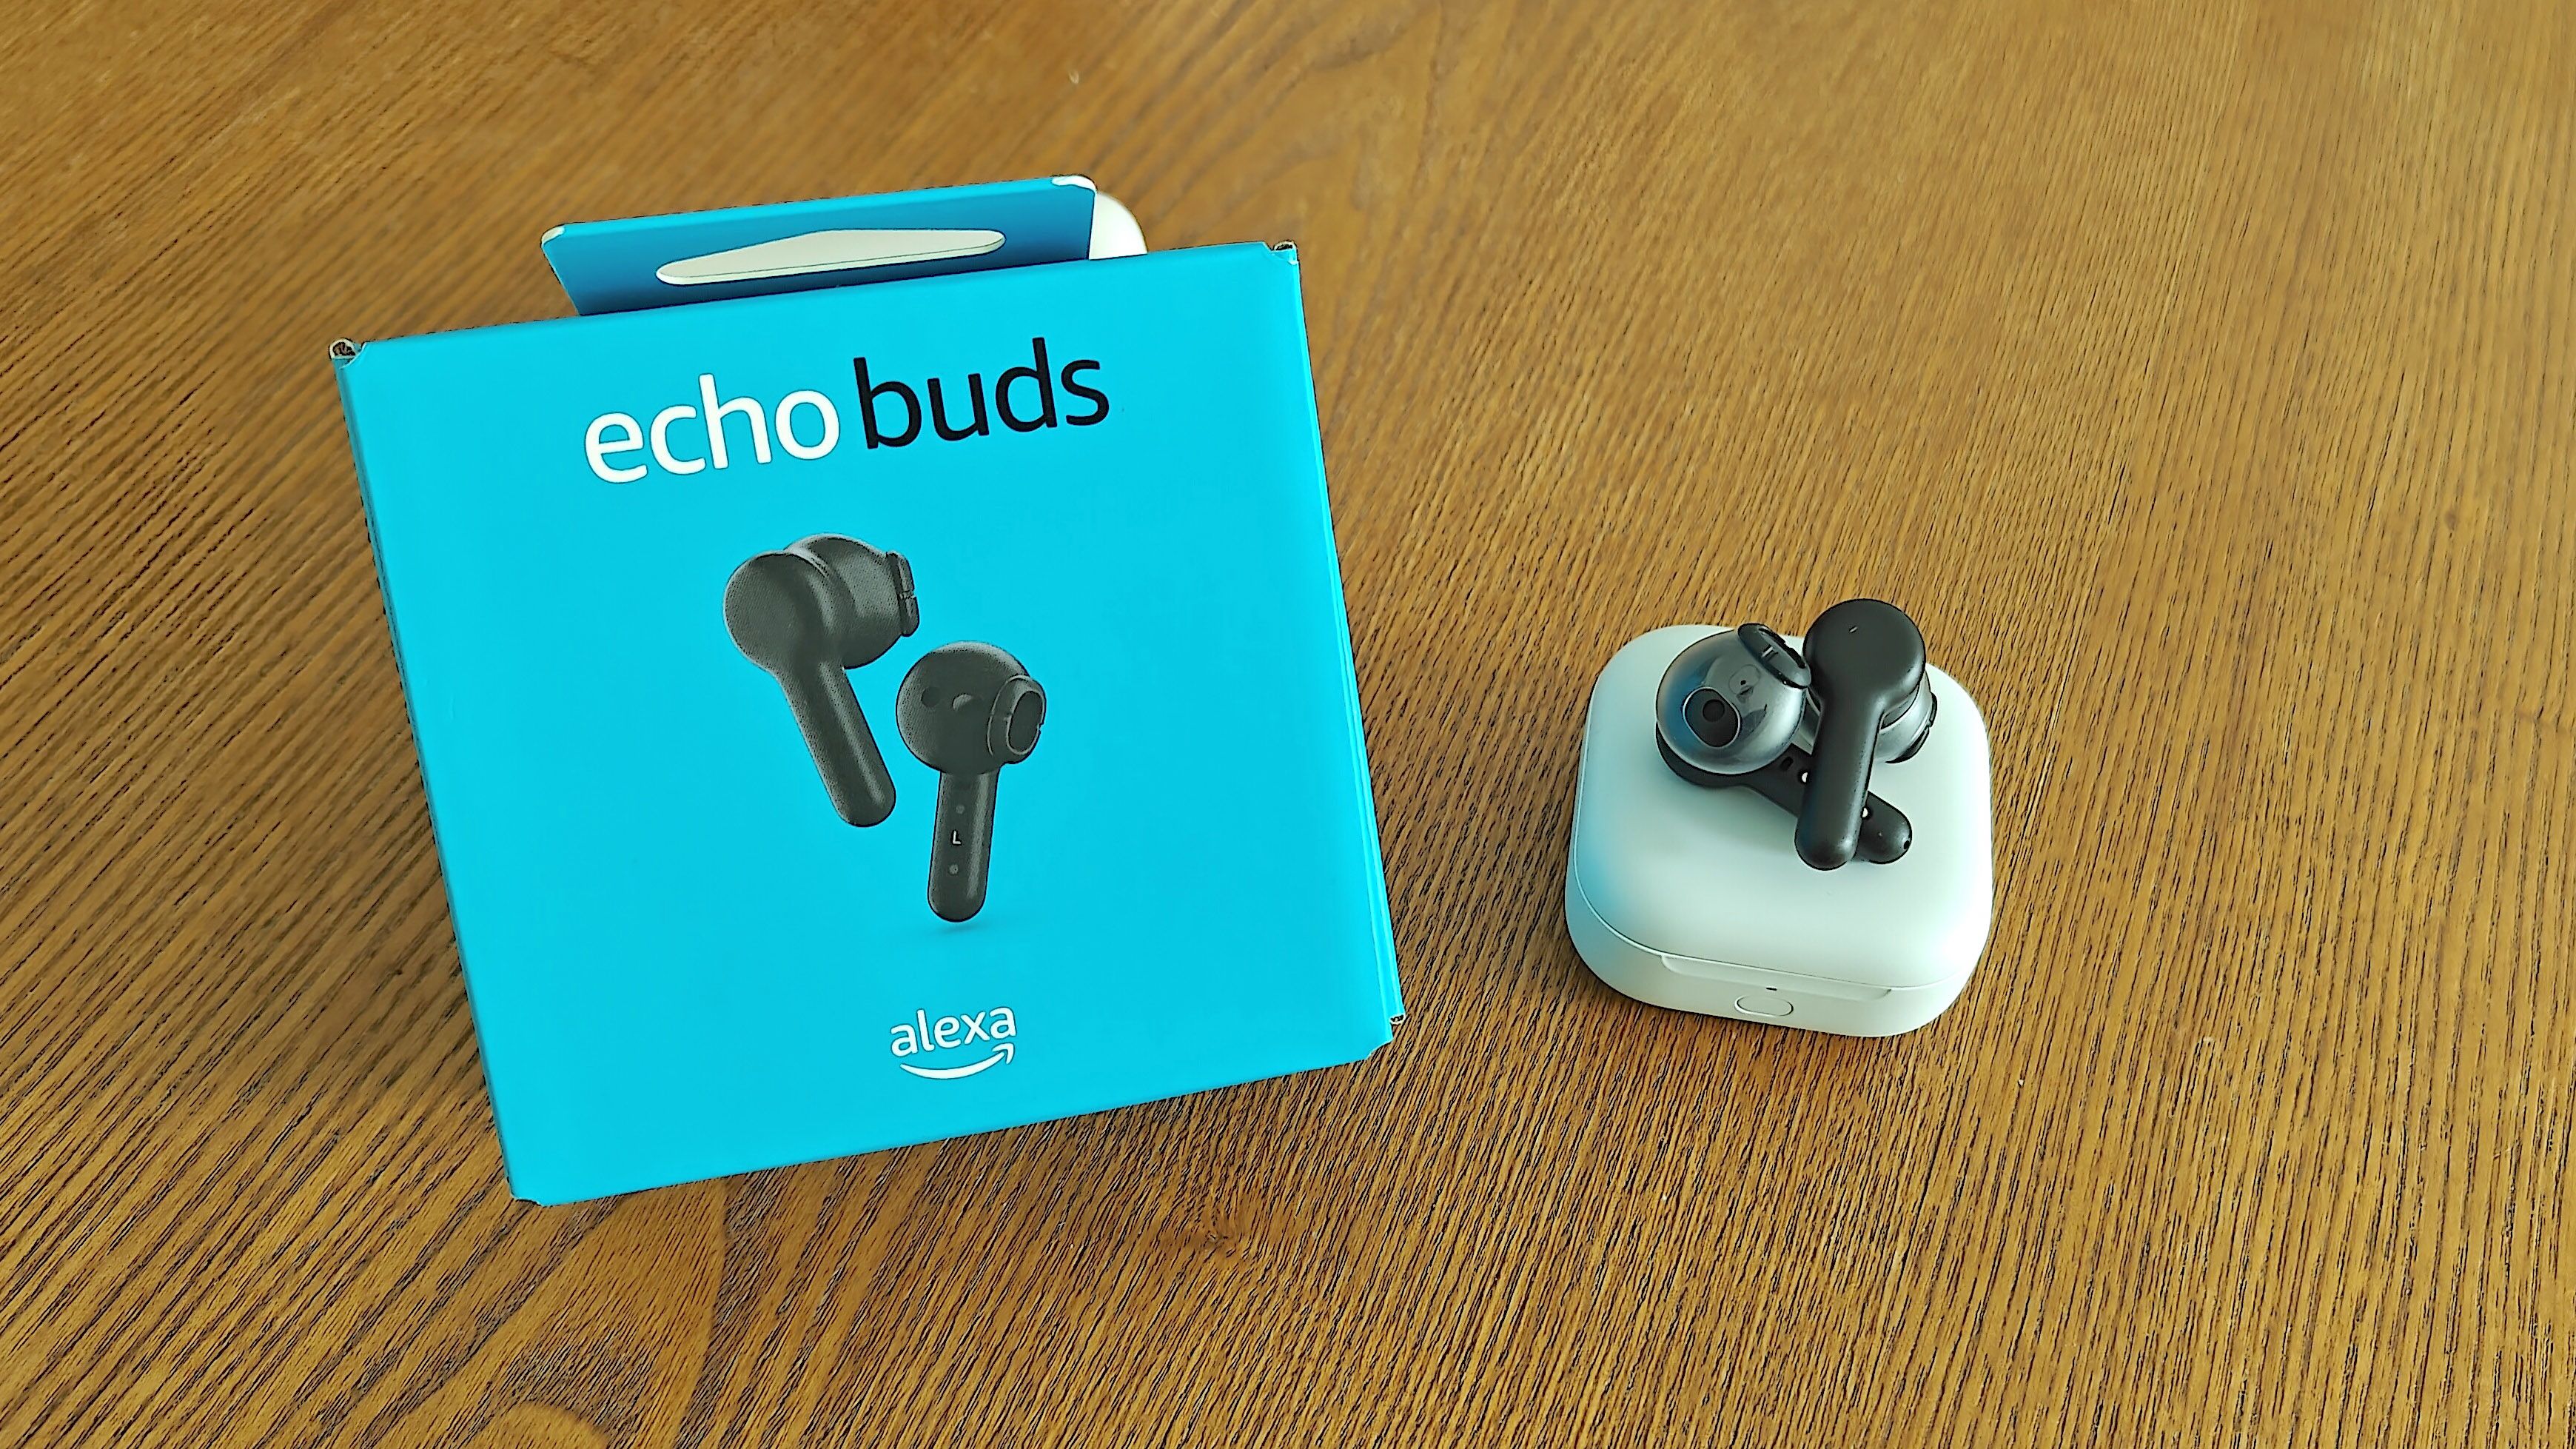 s New Echo Buds Have 2 Key Features That Other Cheap